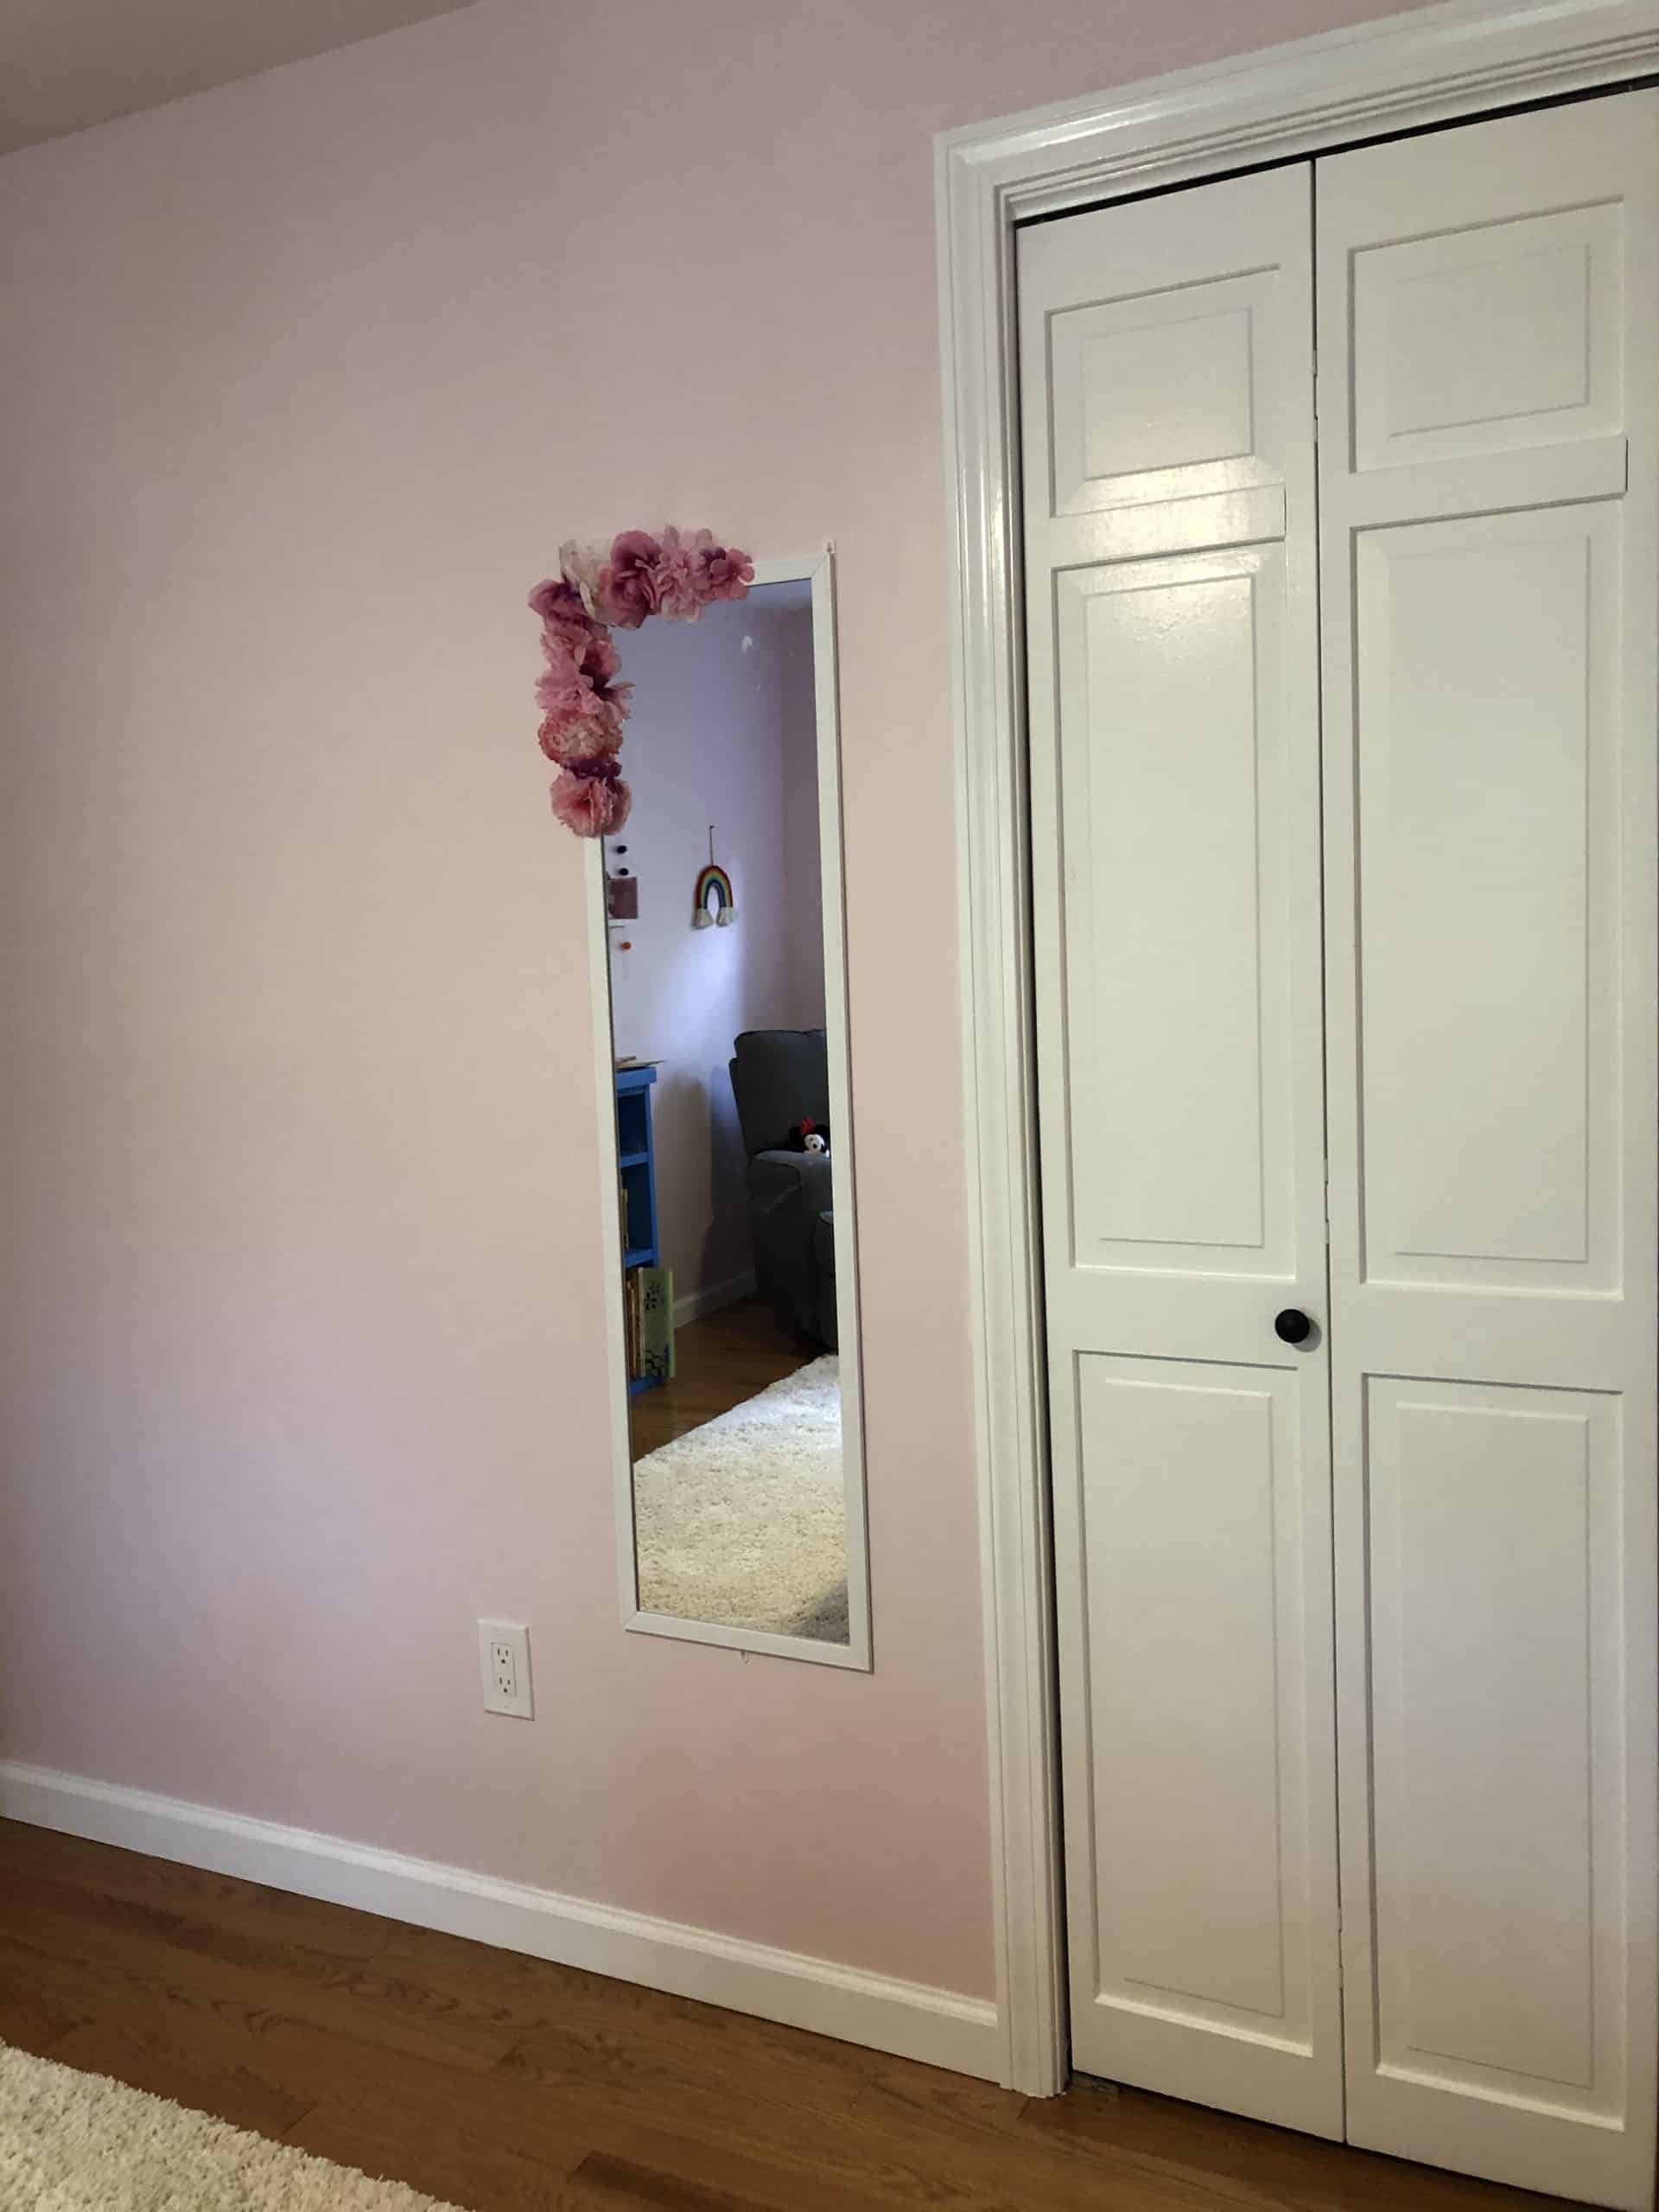 DIY Full Length Flower Mirror for Girls - Weekend DIY Projects